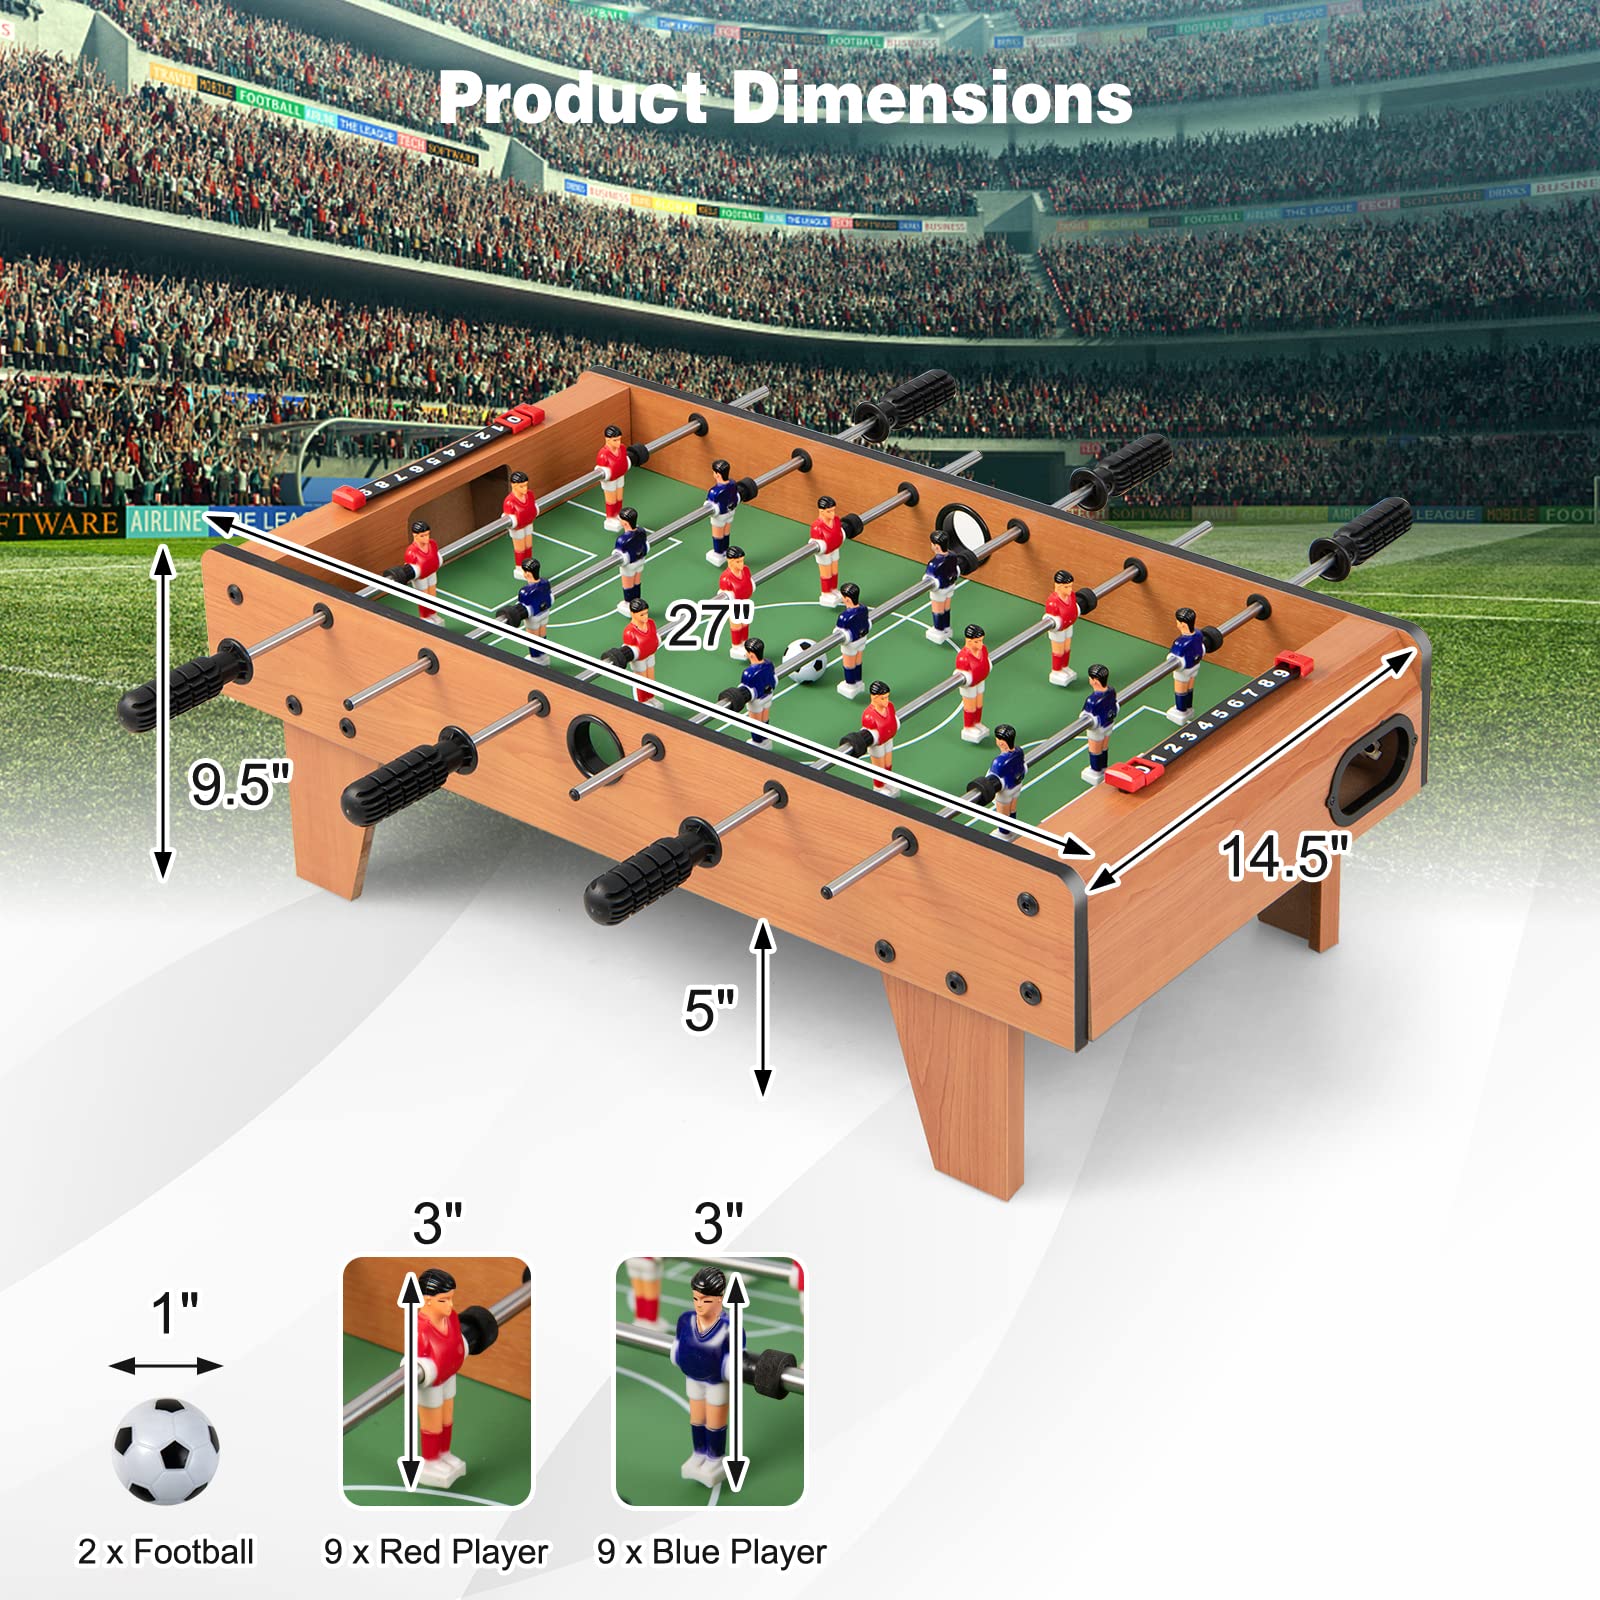 Giantex 27" Foosball Table, Easily Assemble Wooden Soccer Game Table Top w/ Footballs